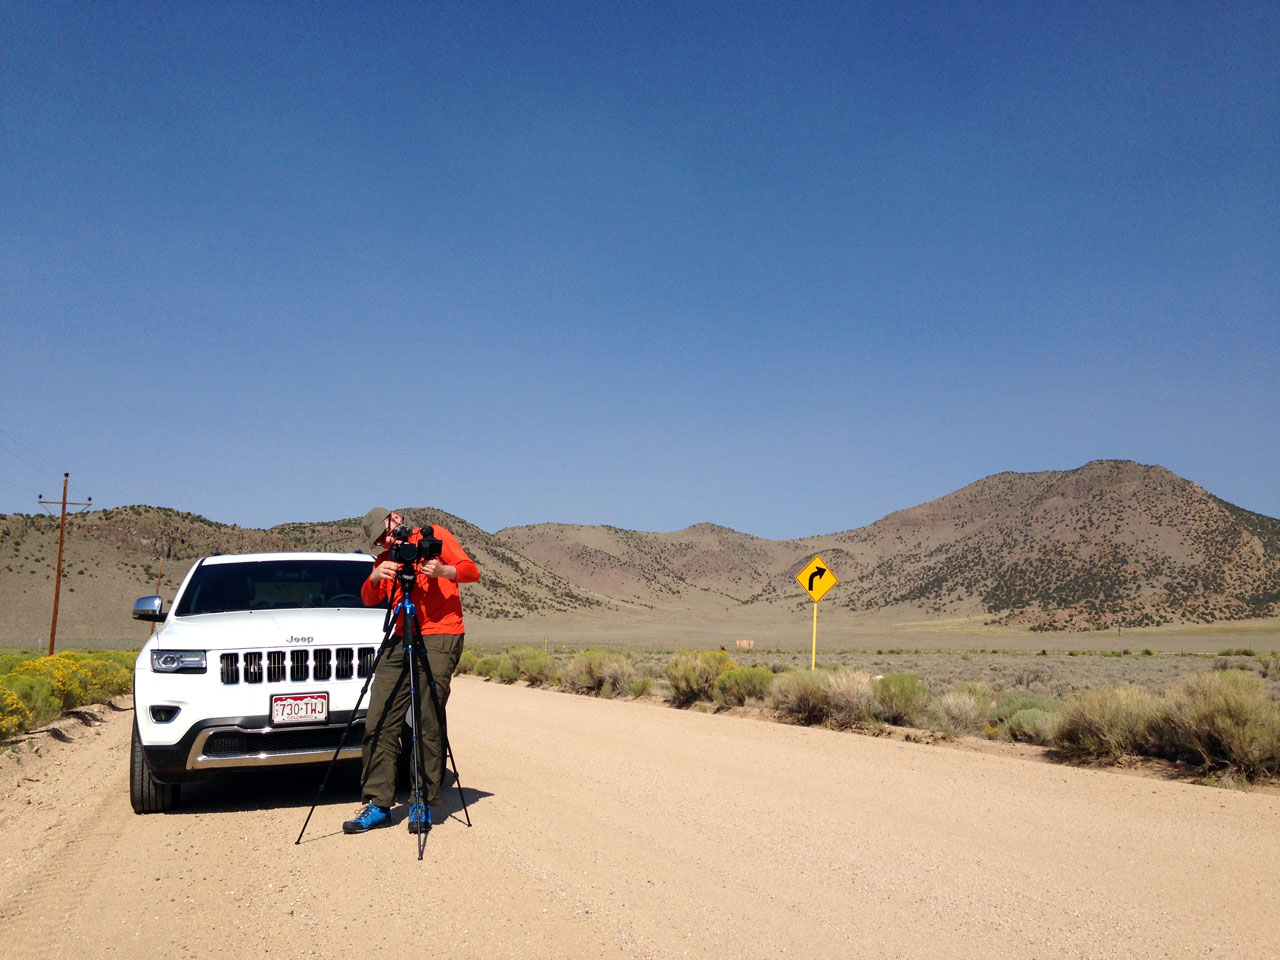 Setting up to film a road in Colorado